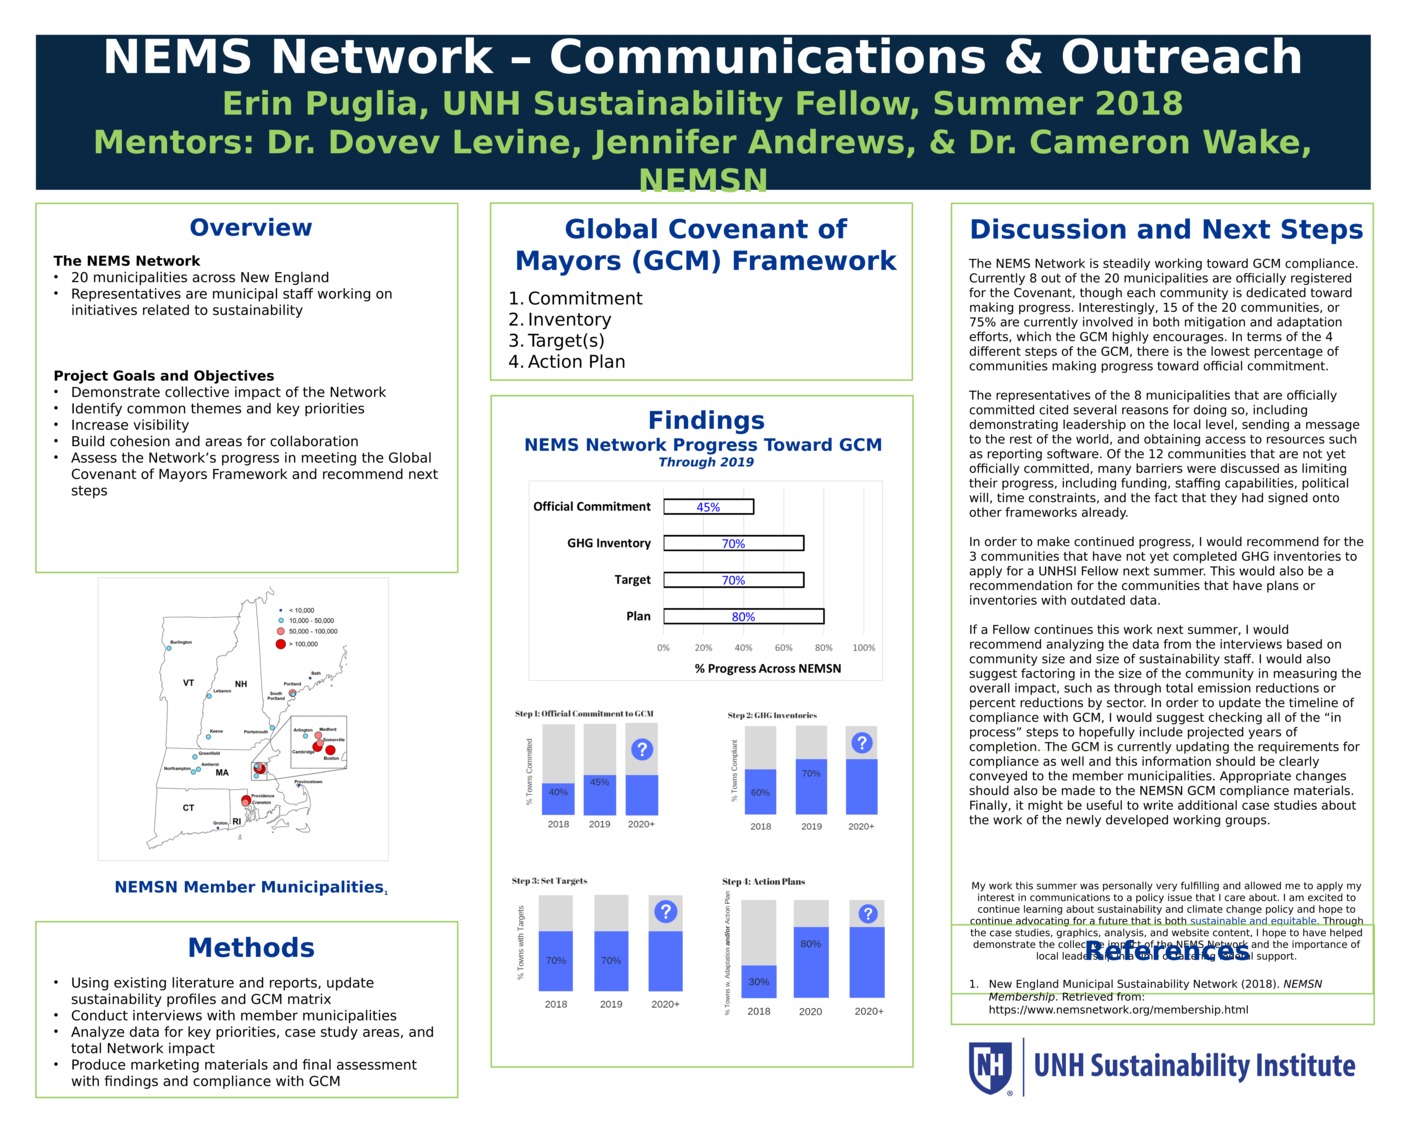 Nems Network - Communications And Outreach by erinpuglia